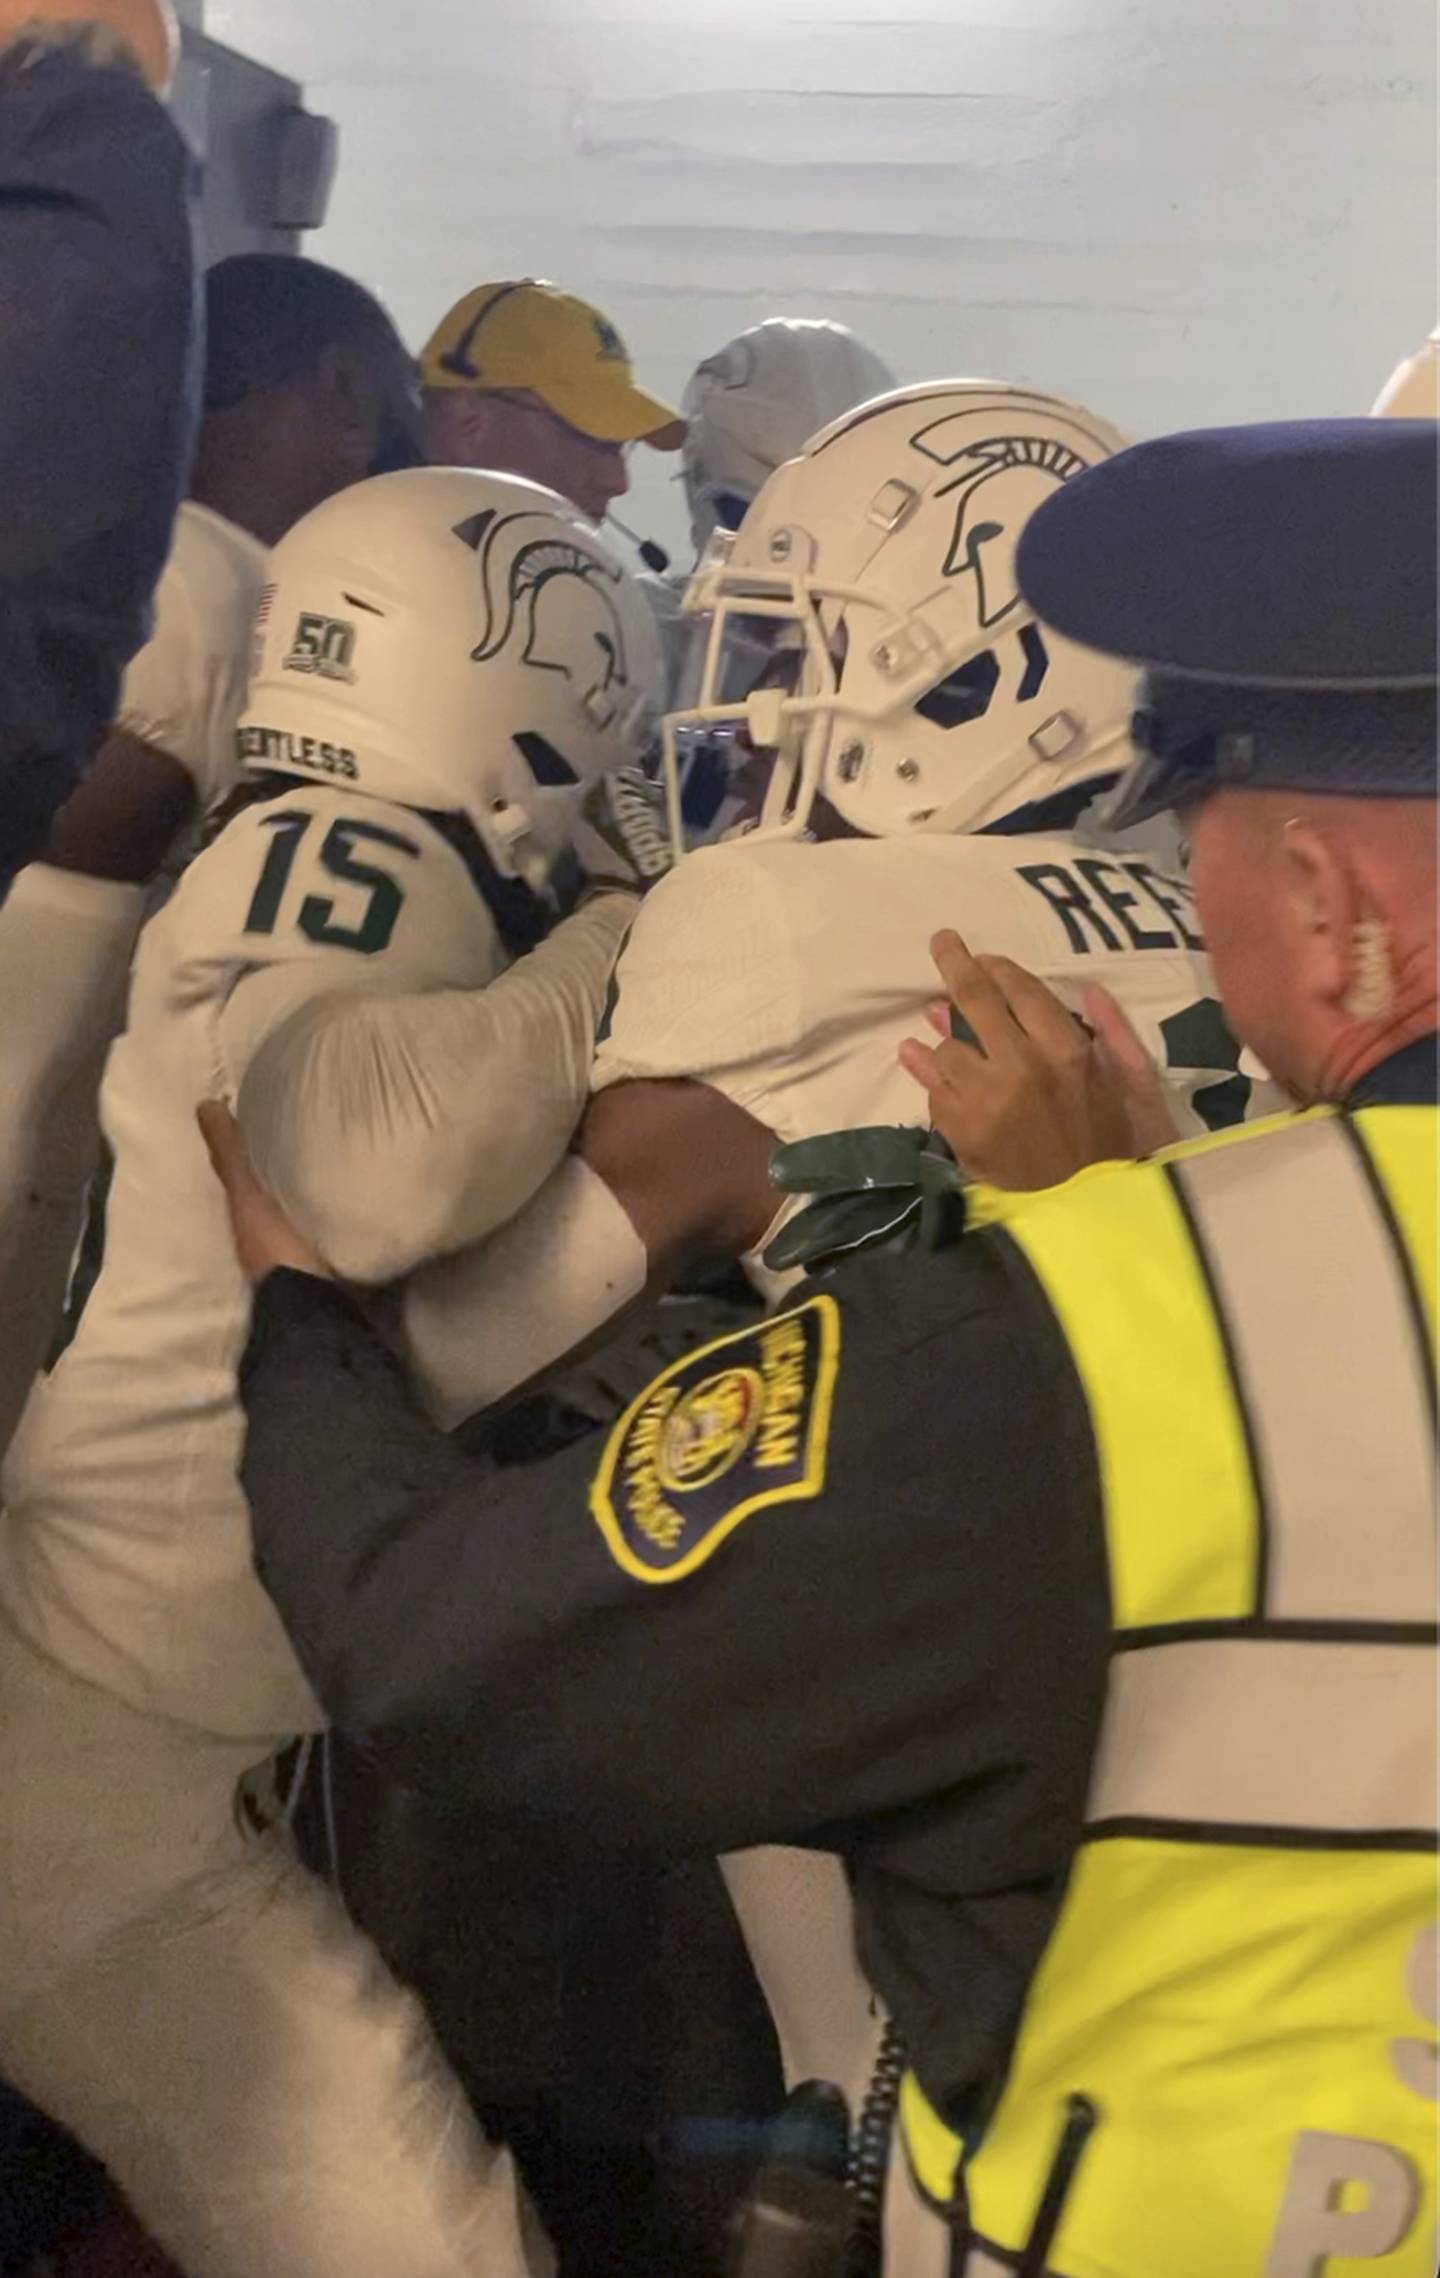 Security and police break up a scuffle between players from Michigan and Michigan State football teams a tunnel after the game on Oct. 29, 2022 in Ann Arbor, Mich.